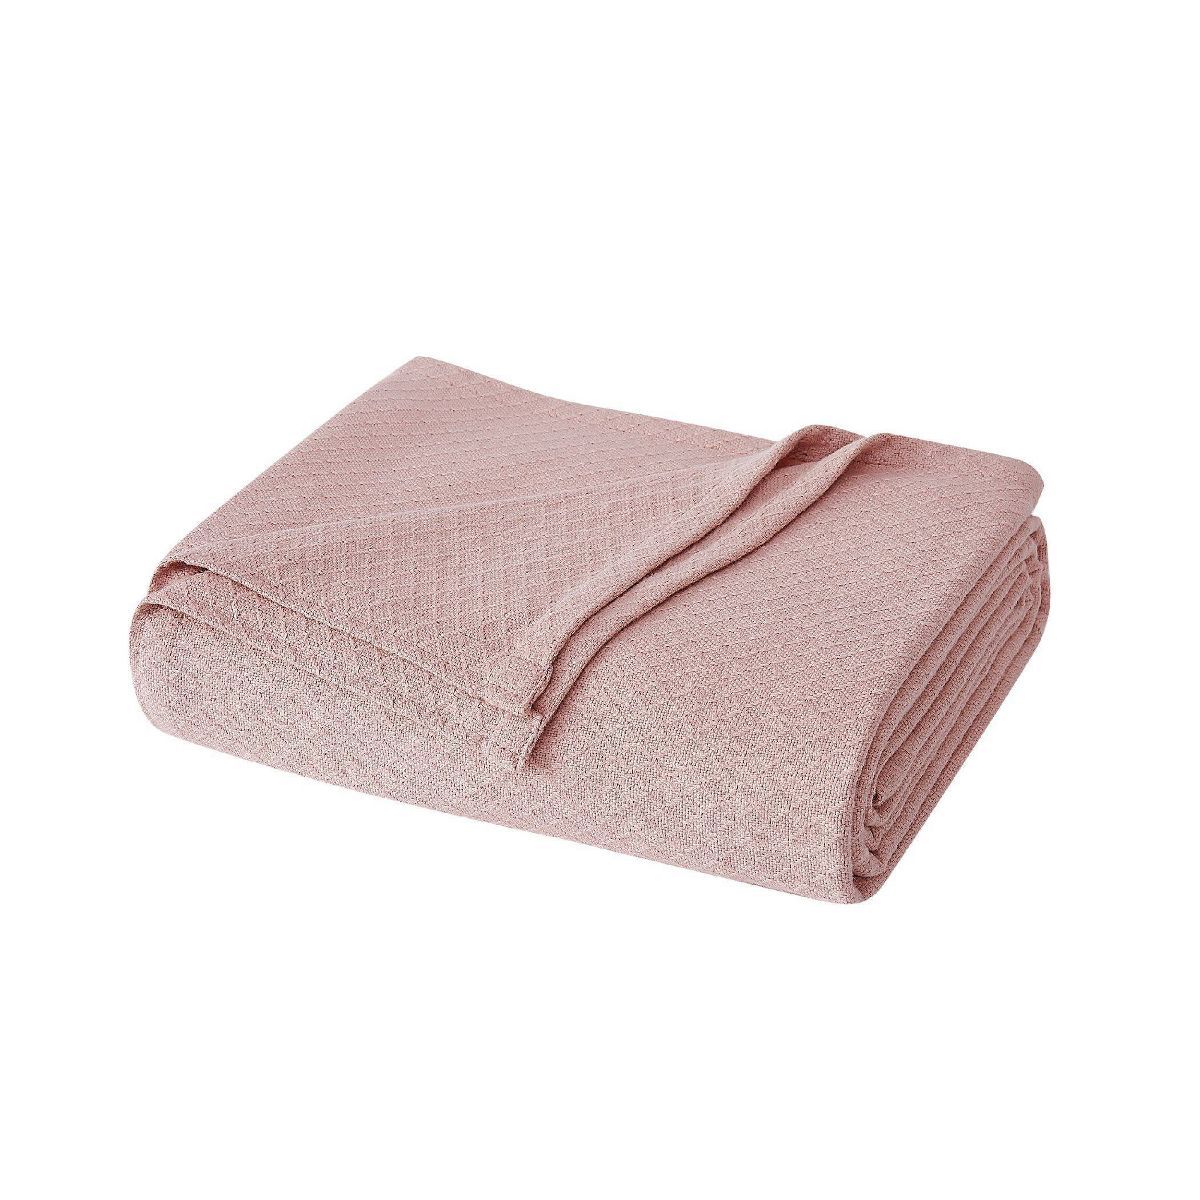 King Deluxe Woven Cotton Bed Blanket Blush - Charisma | Target